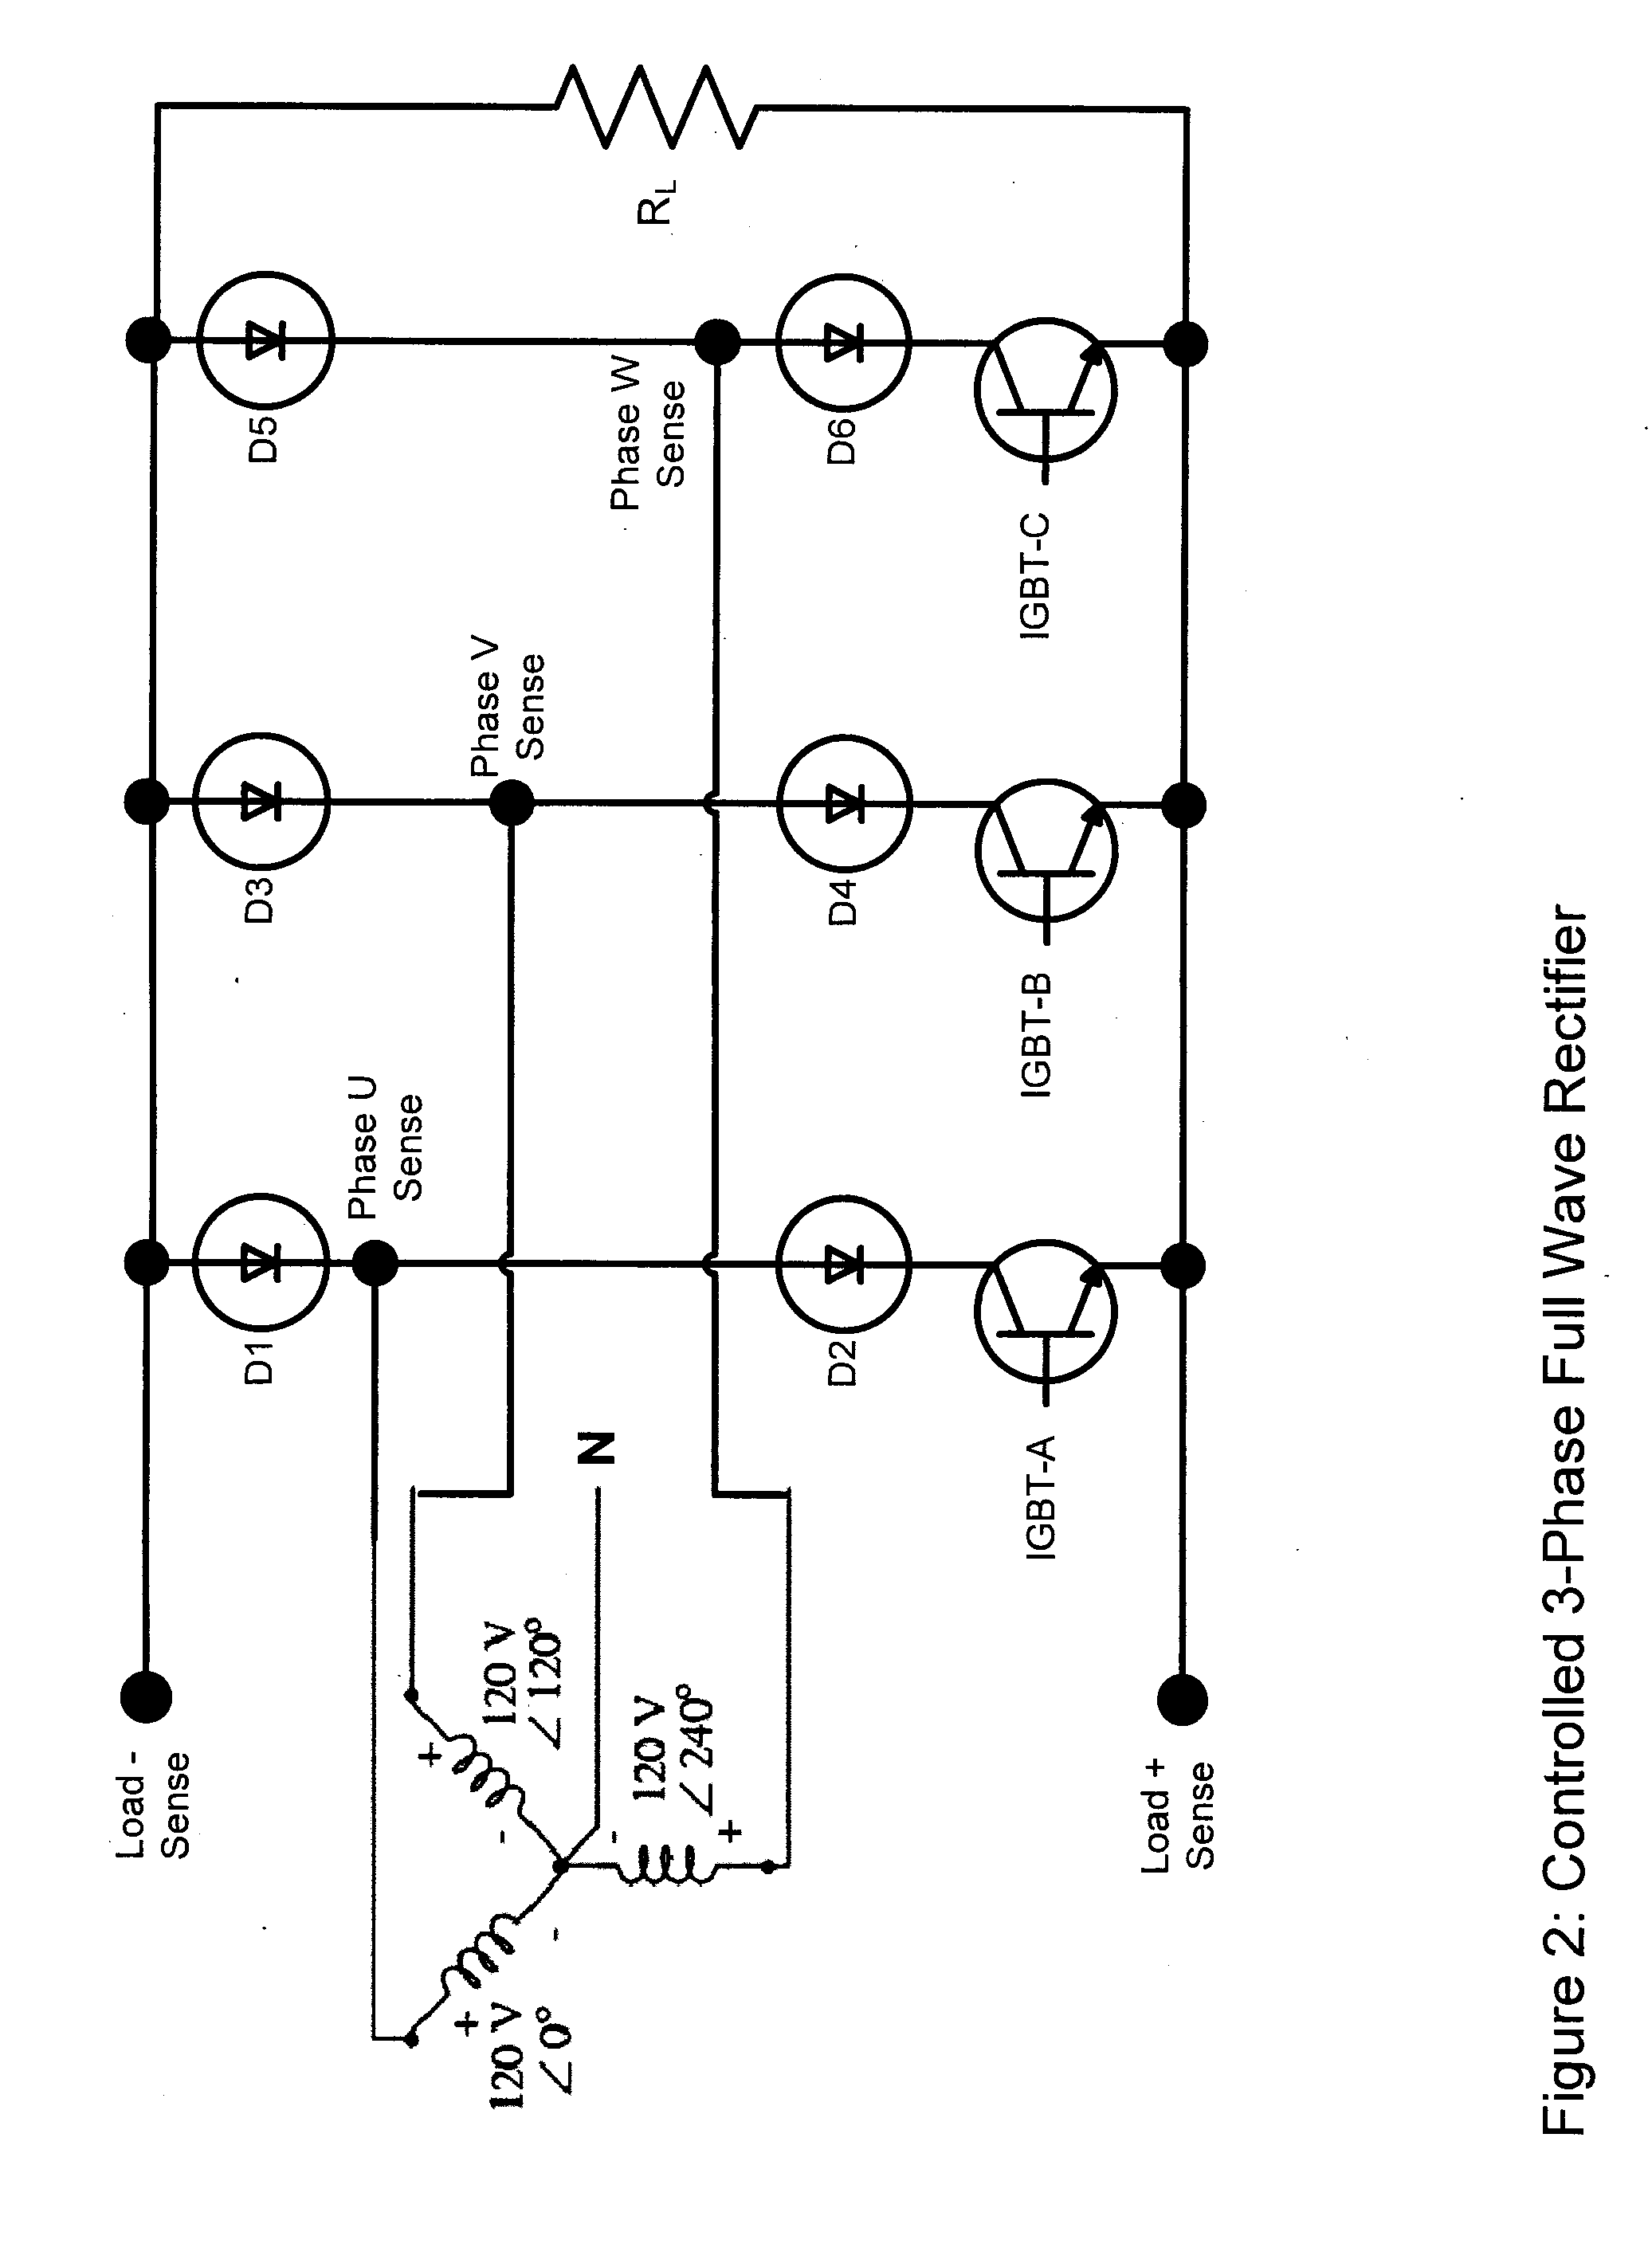 High efficiency control system for the conversion of electrical energy to thermal energy